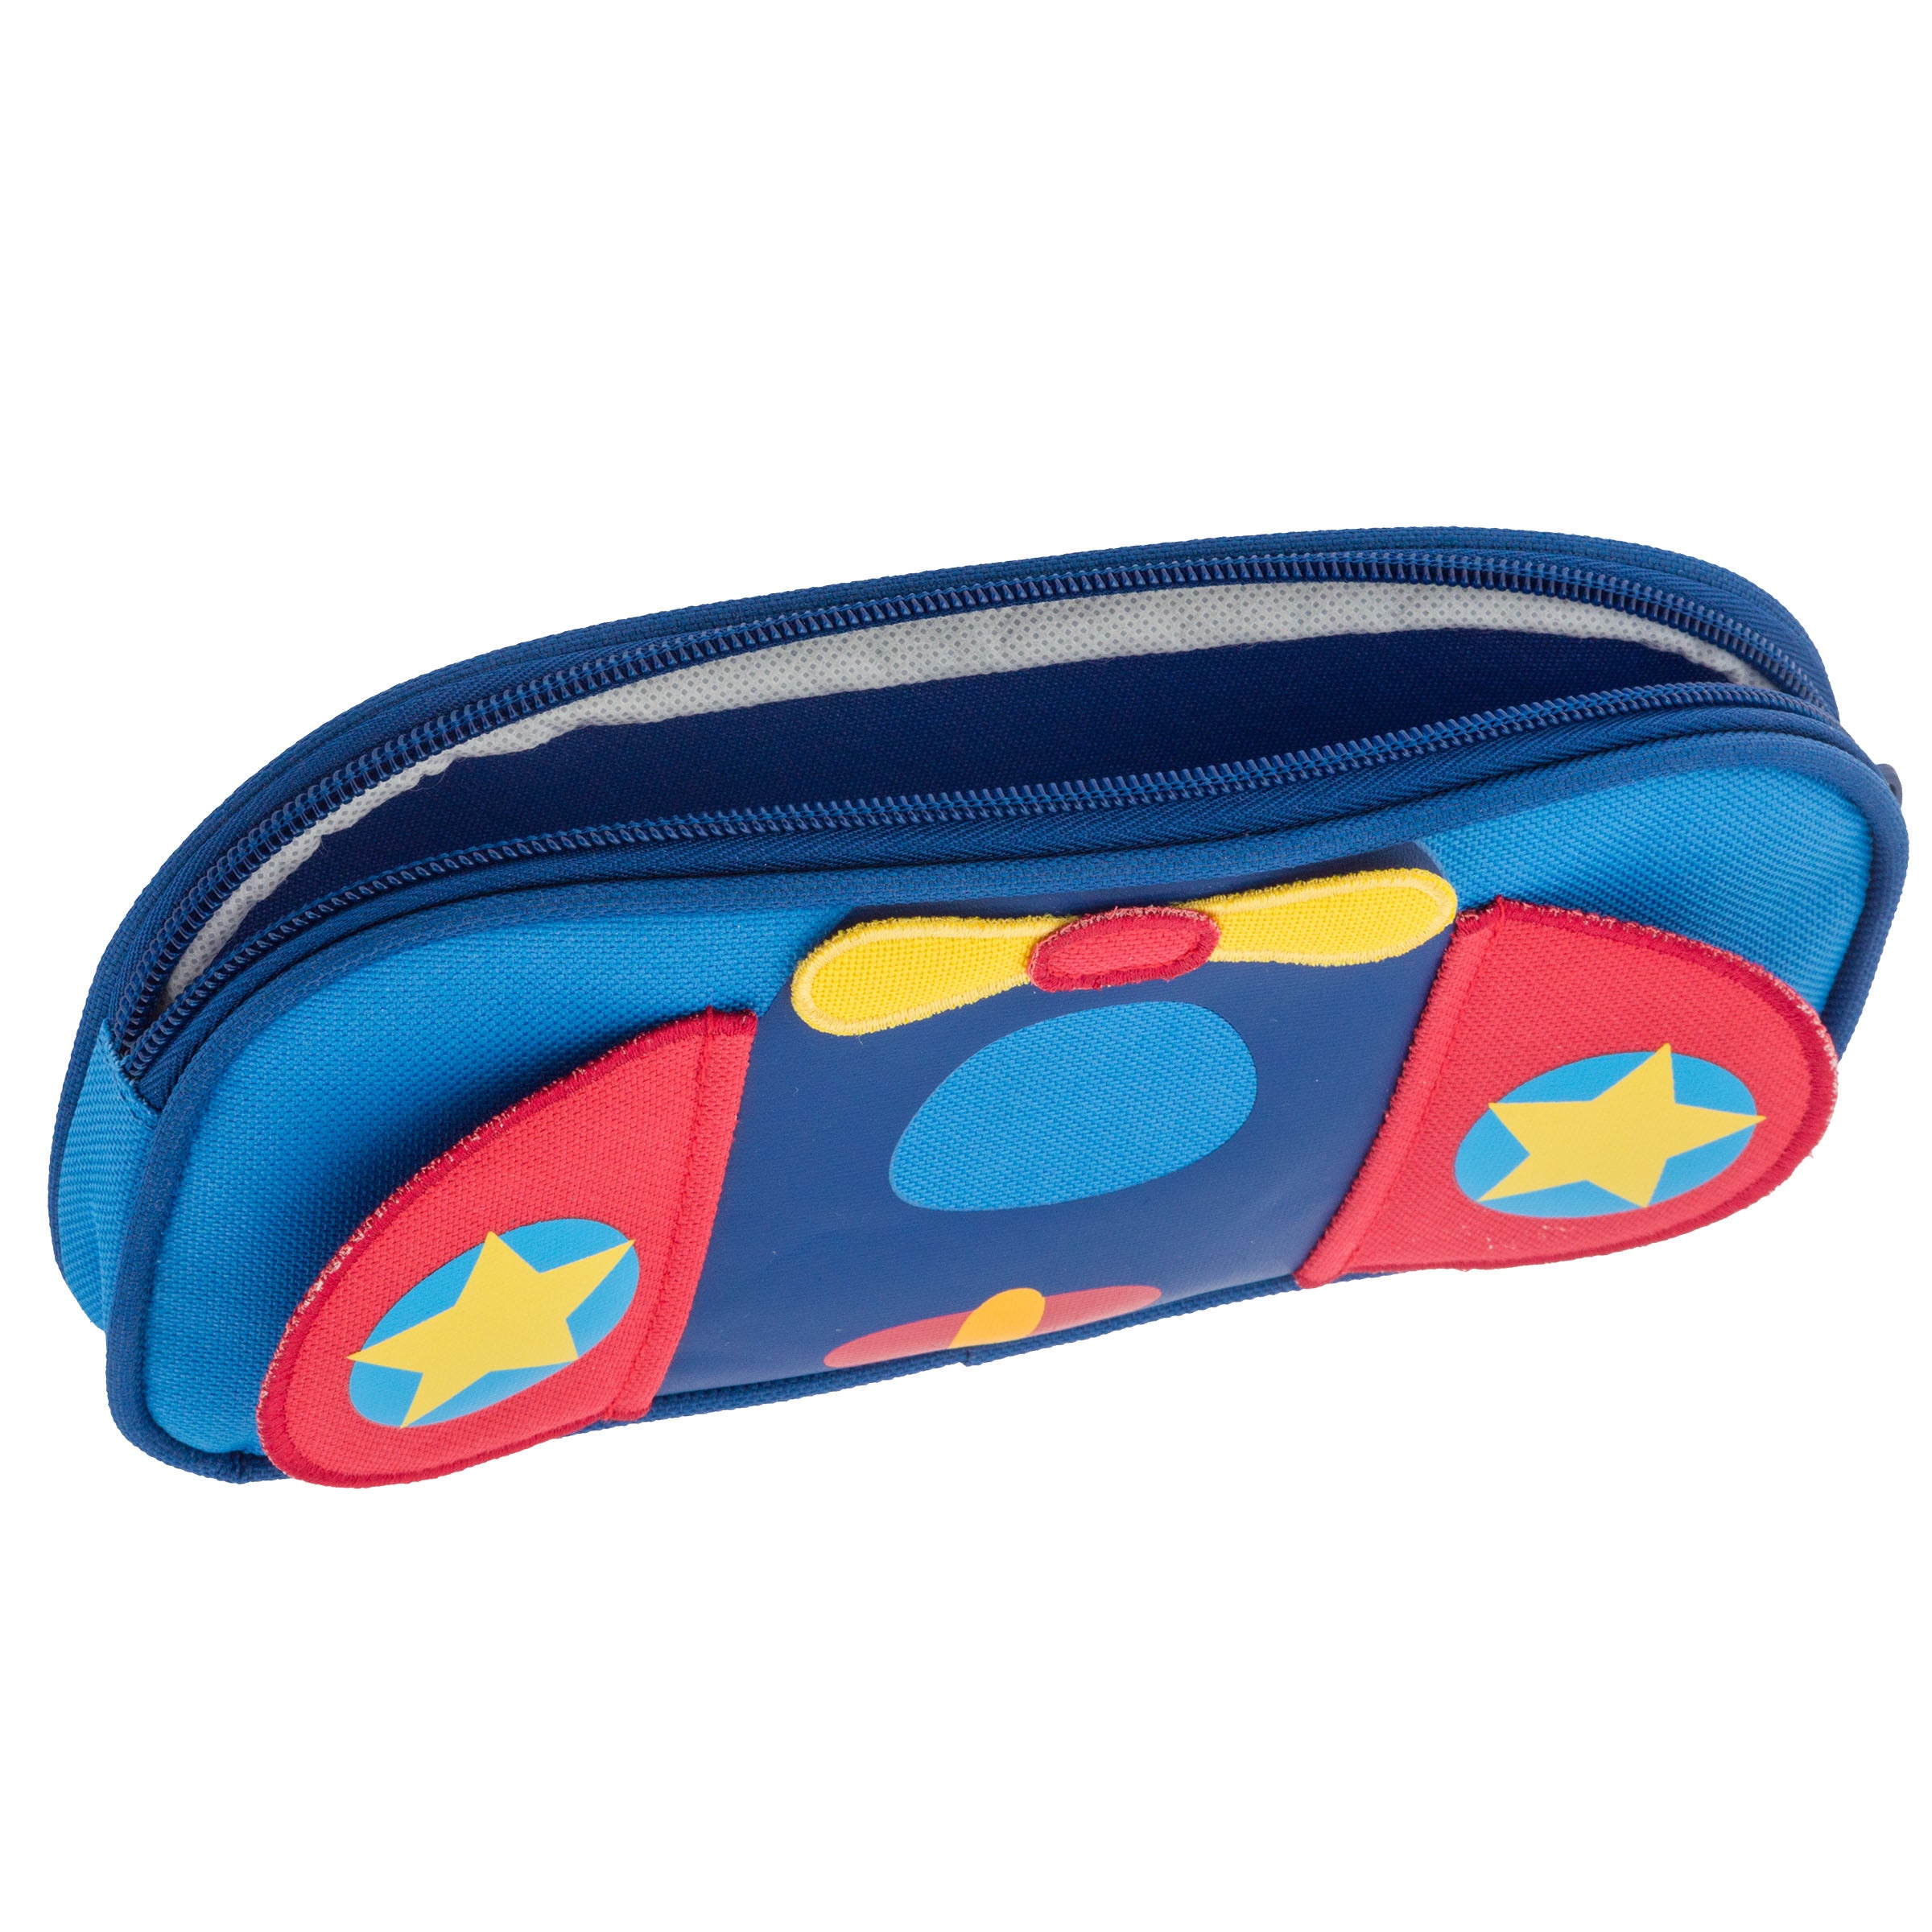 Pencil Pouch - Airplane